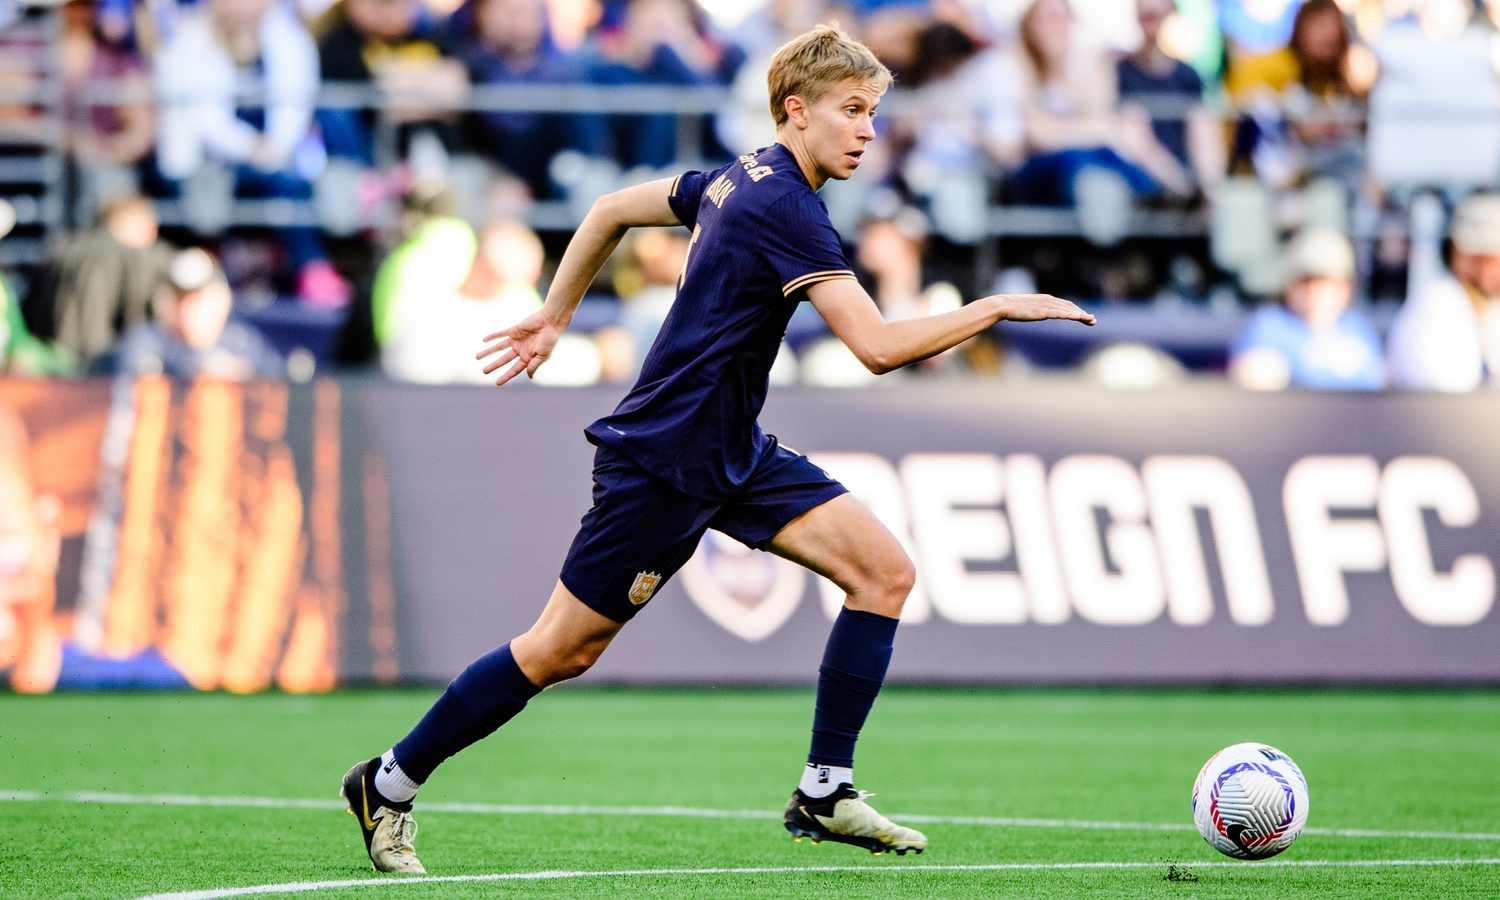 Seattle Reign FC Return Home to Face Chicago Red Stars: Match Preview and Key Players